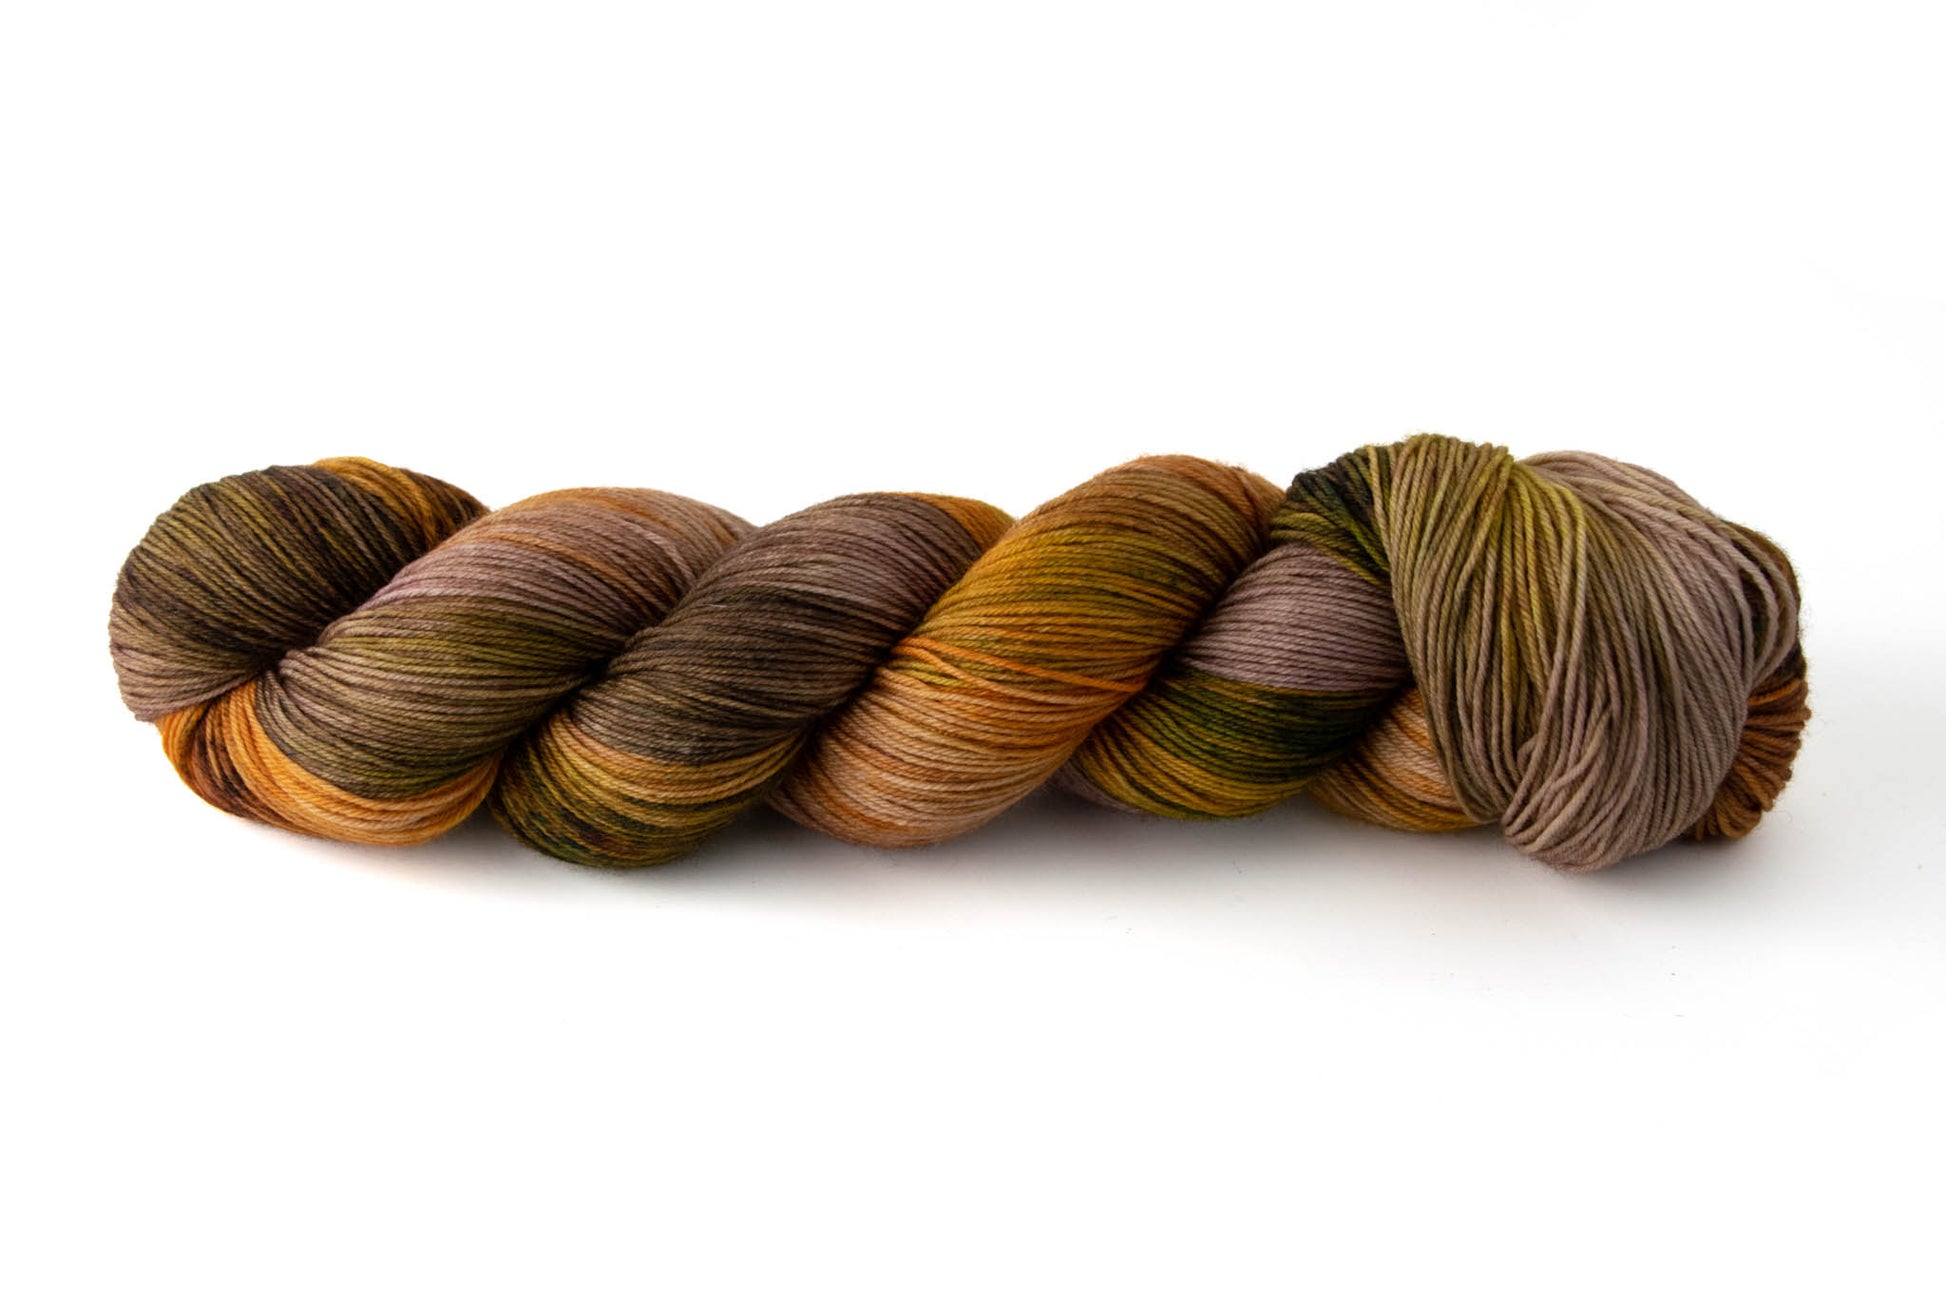 A skein of chocolate brown, rusty orange, and olive green variegated hand-dyed wool yarn.